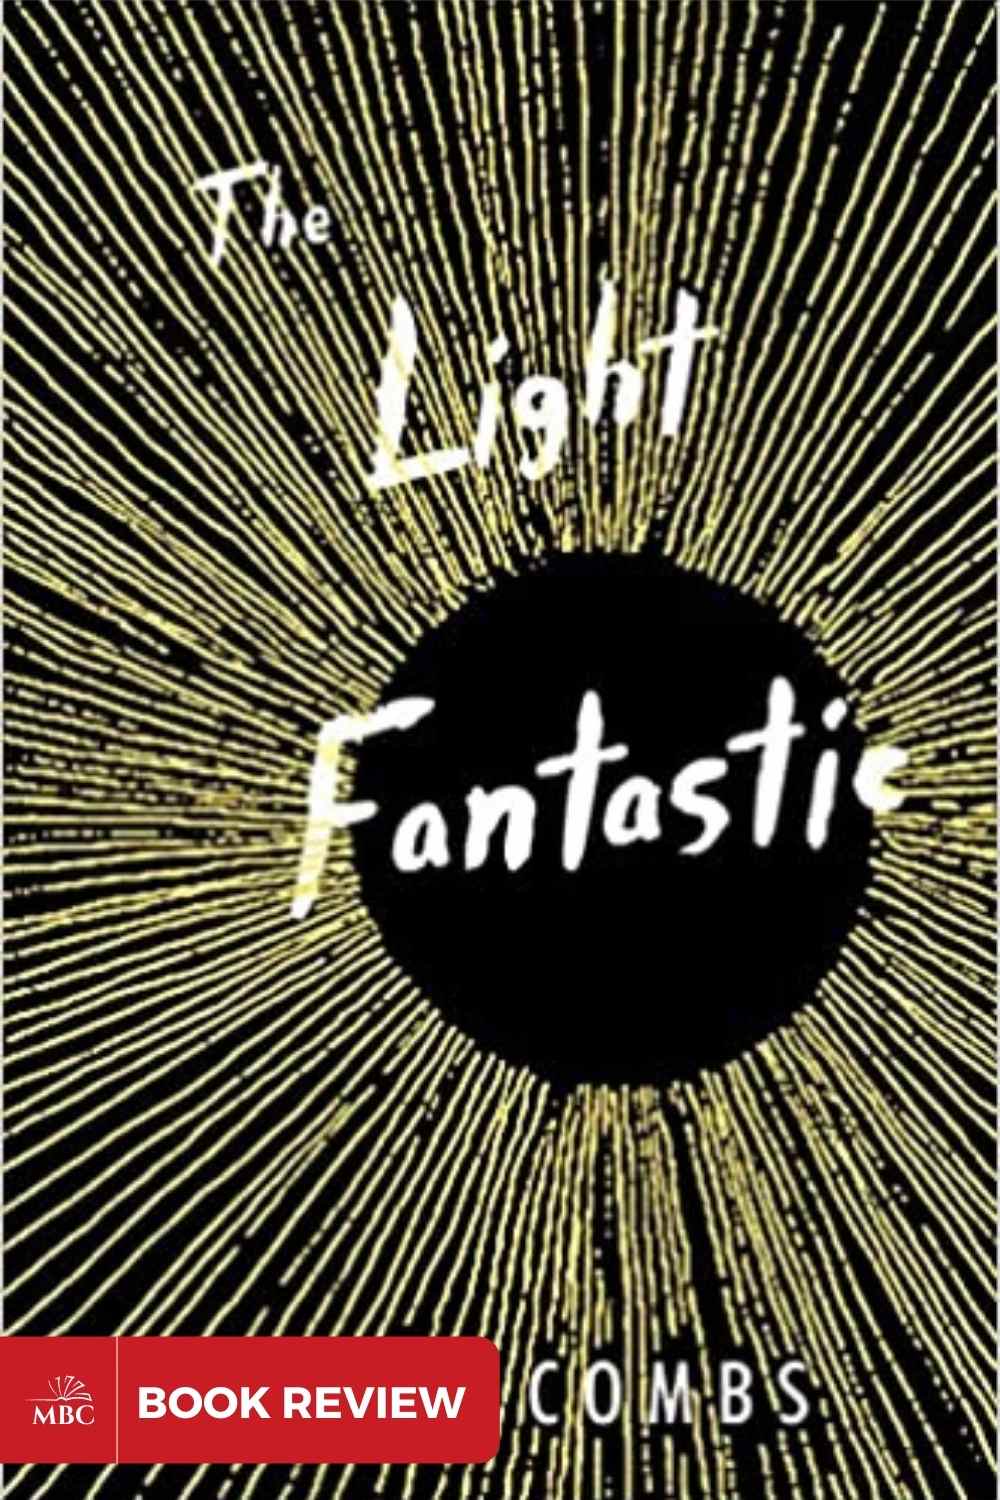 BOOK REVIEW The Light Fantastic by Sarah Combs